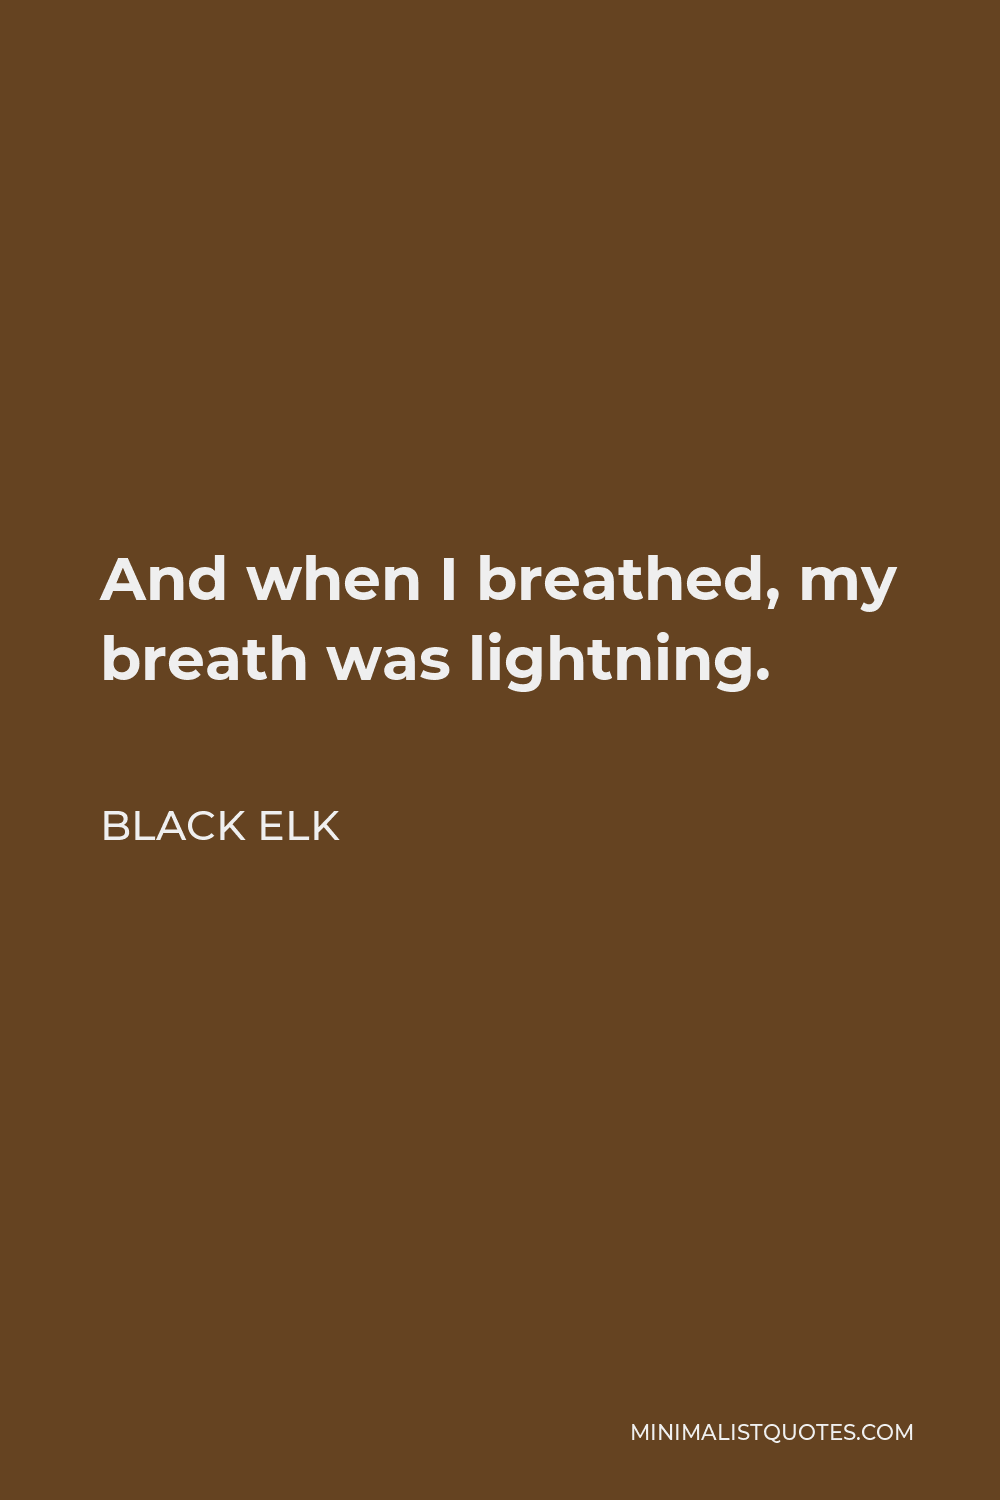 Black Elk Quote - And when I breathed, my breath was lightning.